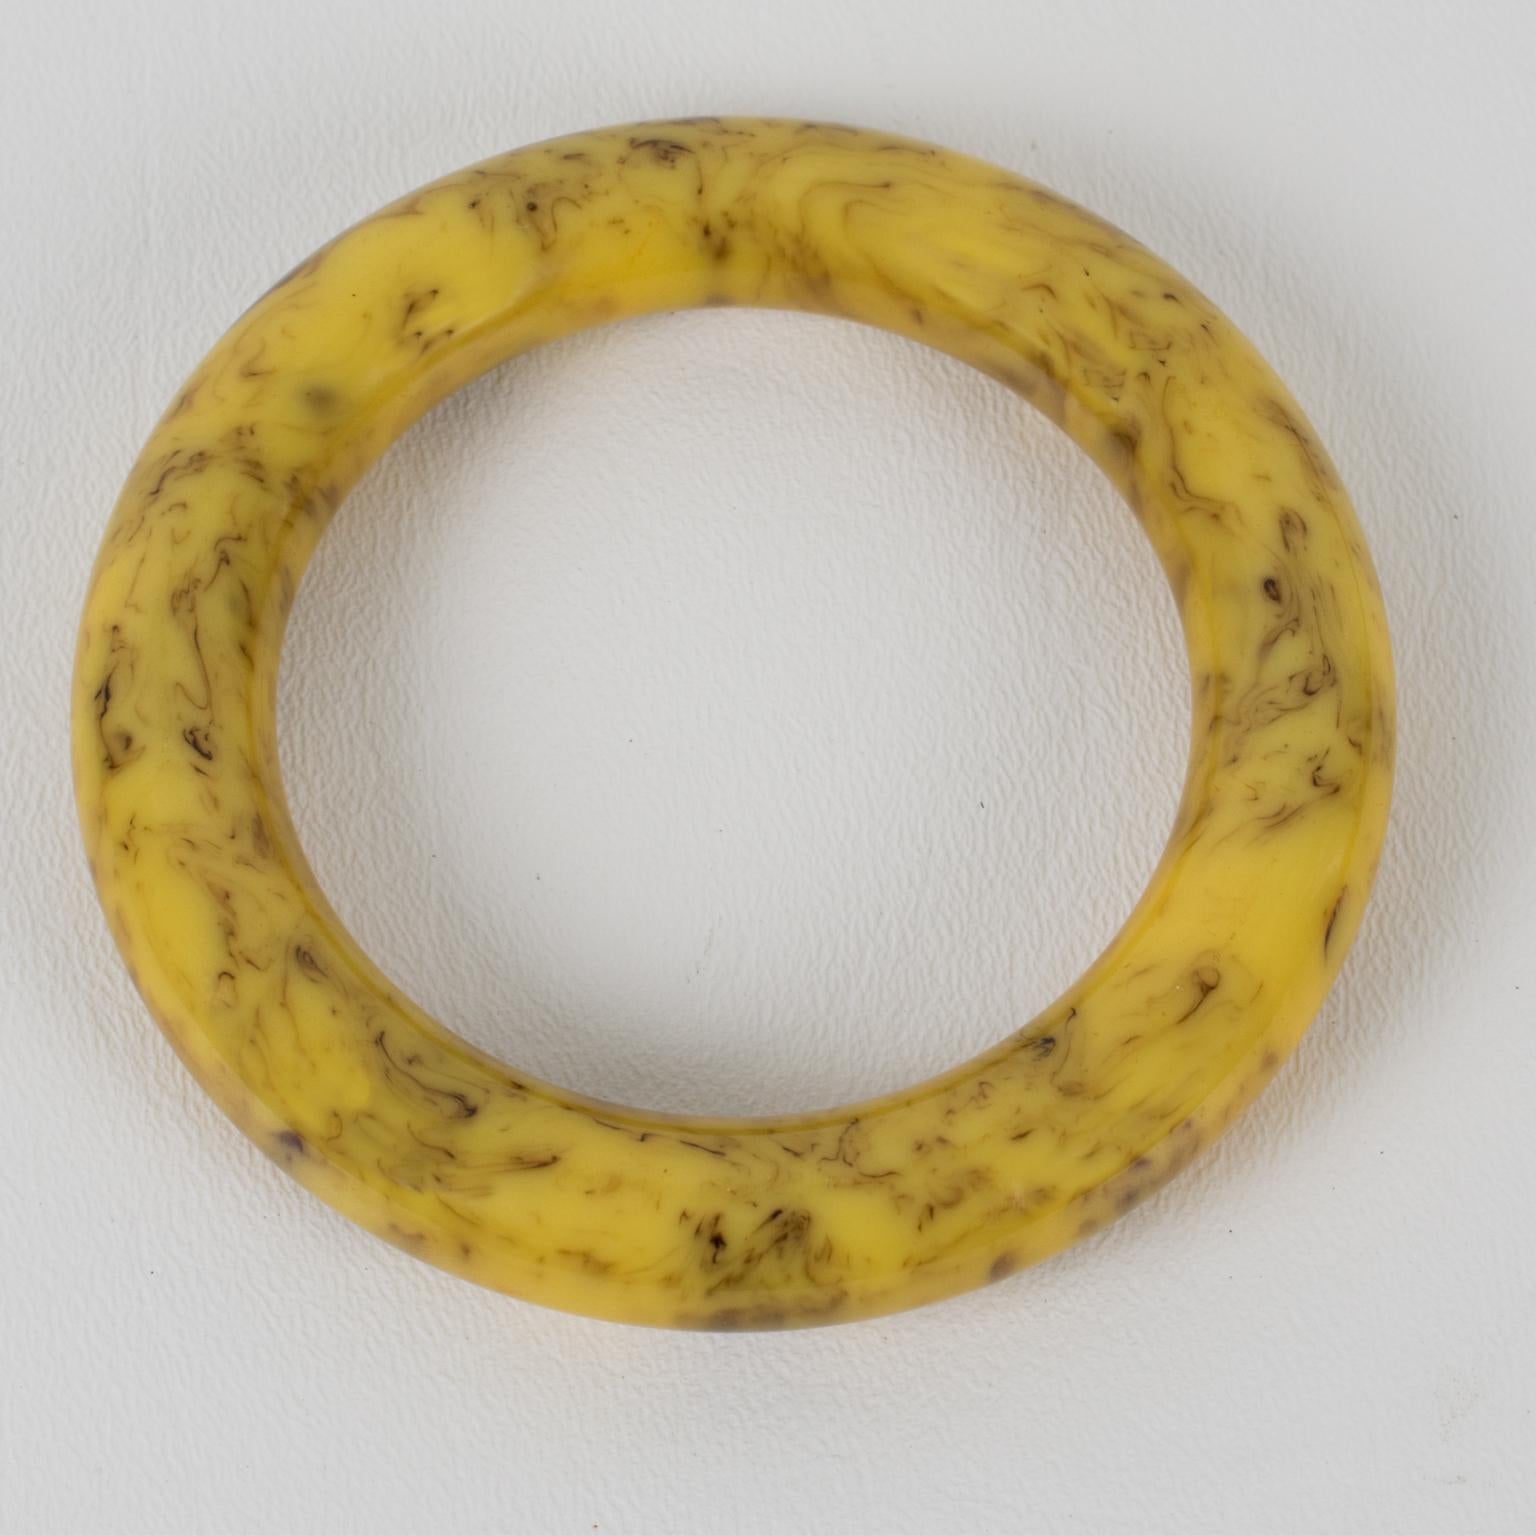 Bakelite Bracelet Bangle Vanilla and Chocolate Marble In Excellent Condition For Sale In Atlanta, GA